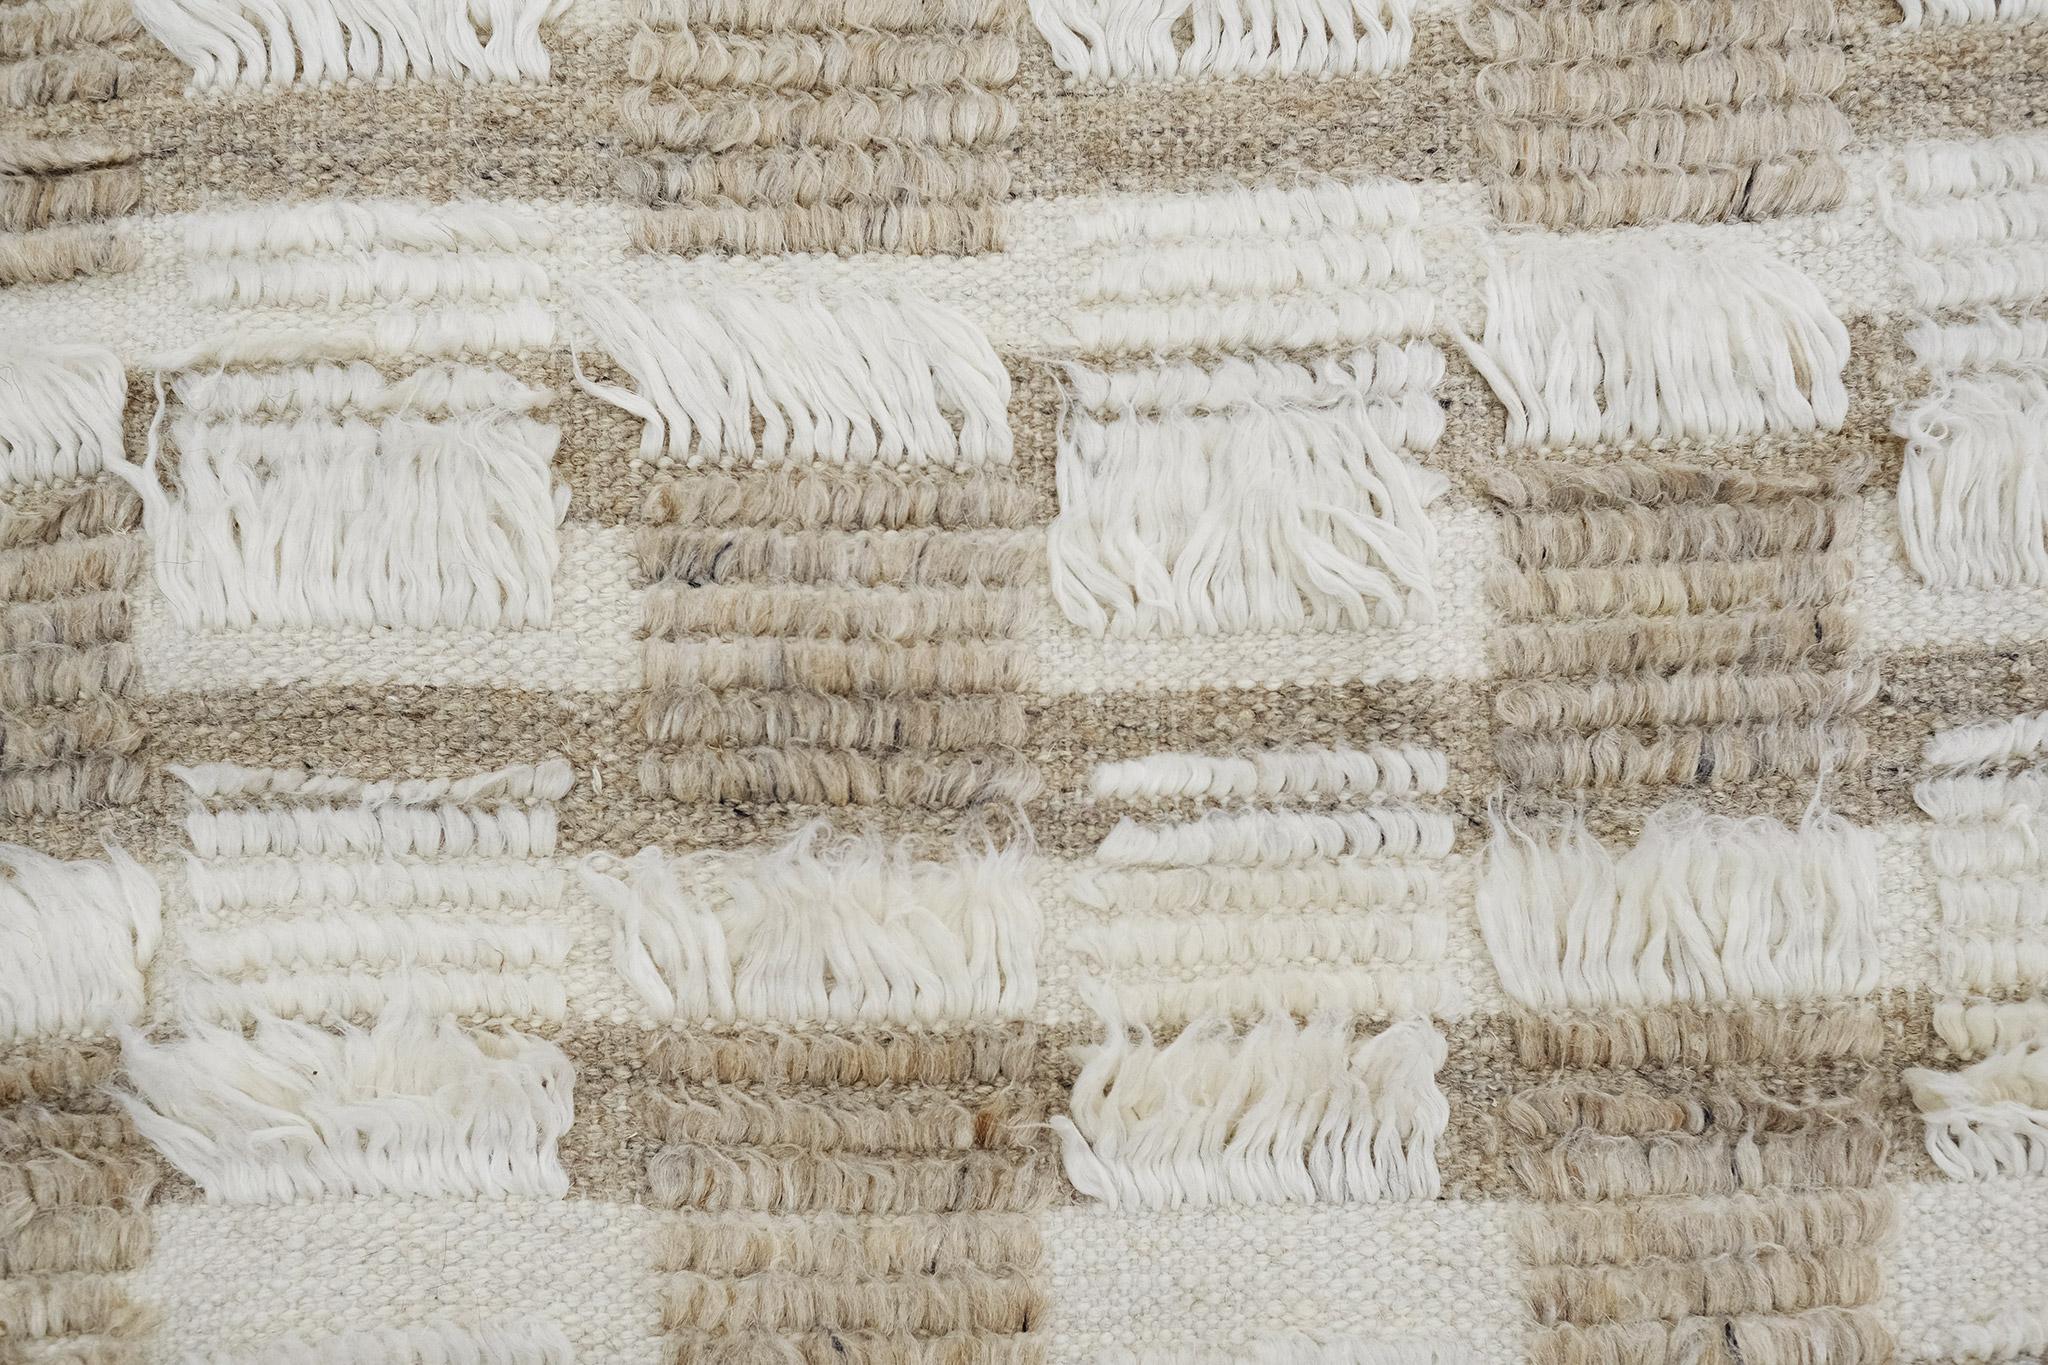 The Amia rug interlaces horizontal stripe patterns of alternating pile heights, with openings of flatweave bands. This bright neutral colorway combines ivory and natural wheat tones.

An extension of Mehraban’s popular Amihan design, the Sahara